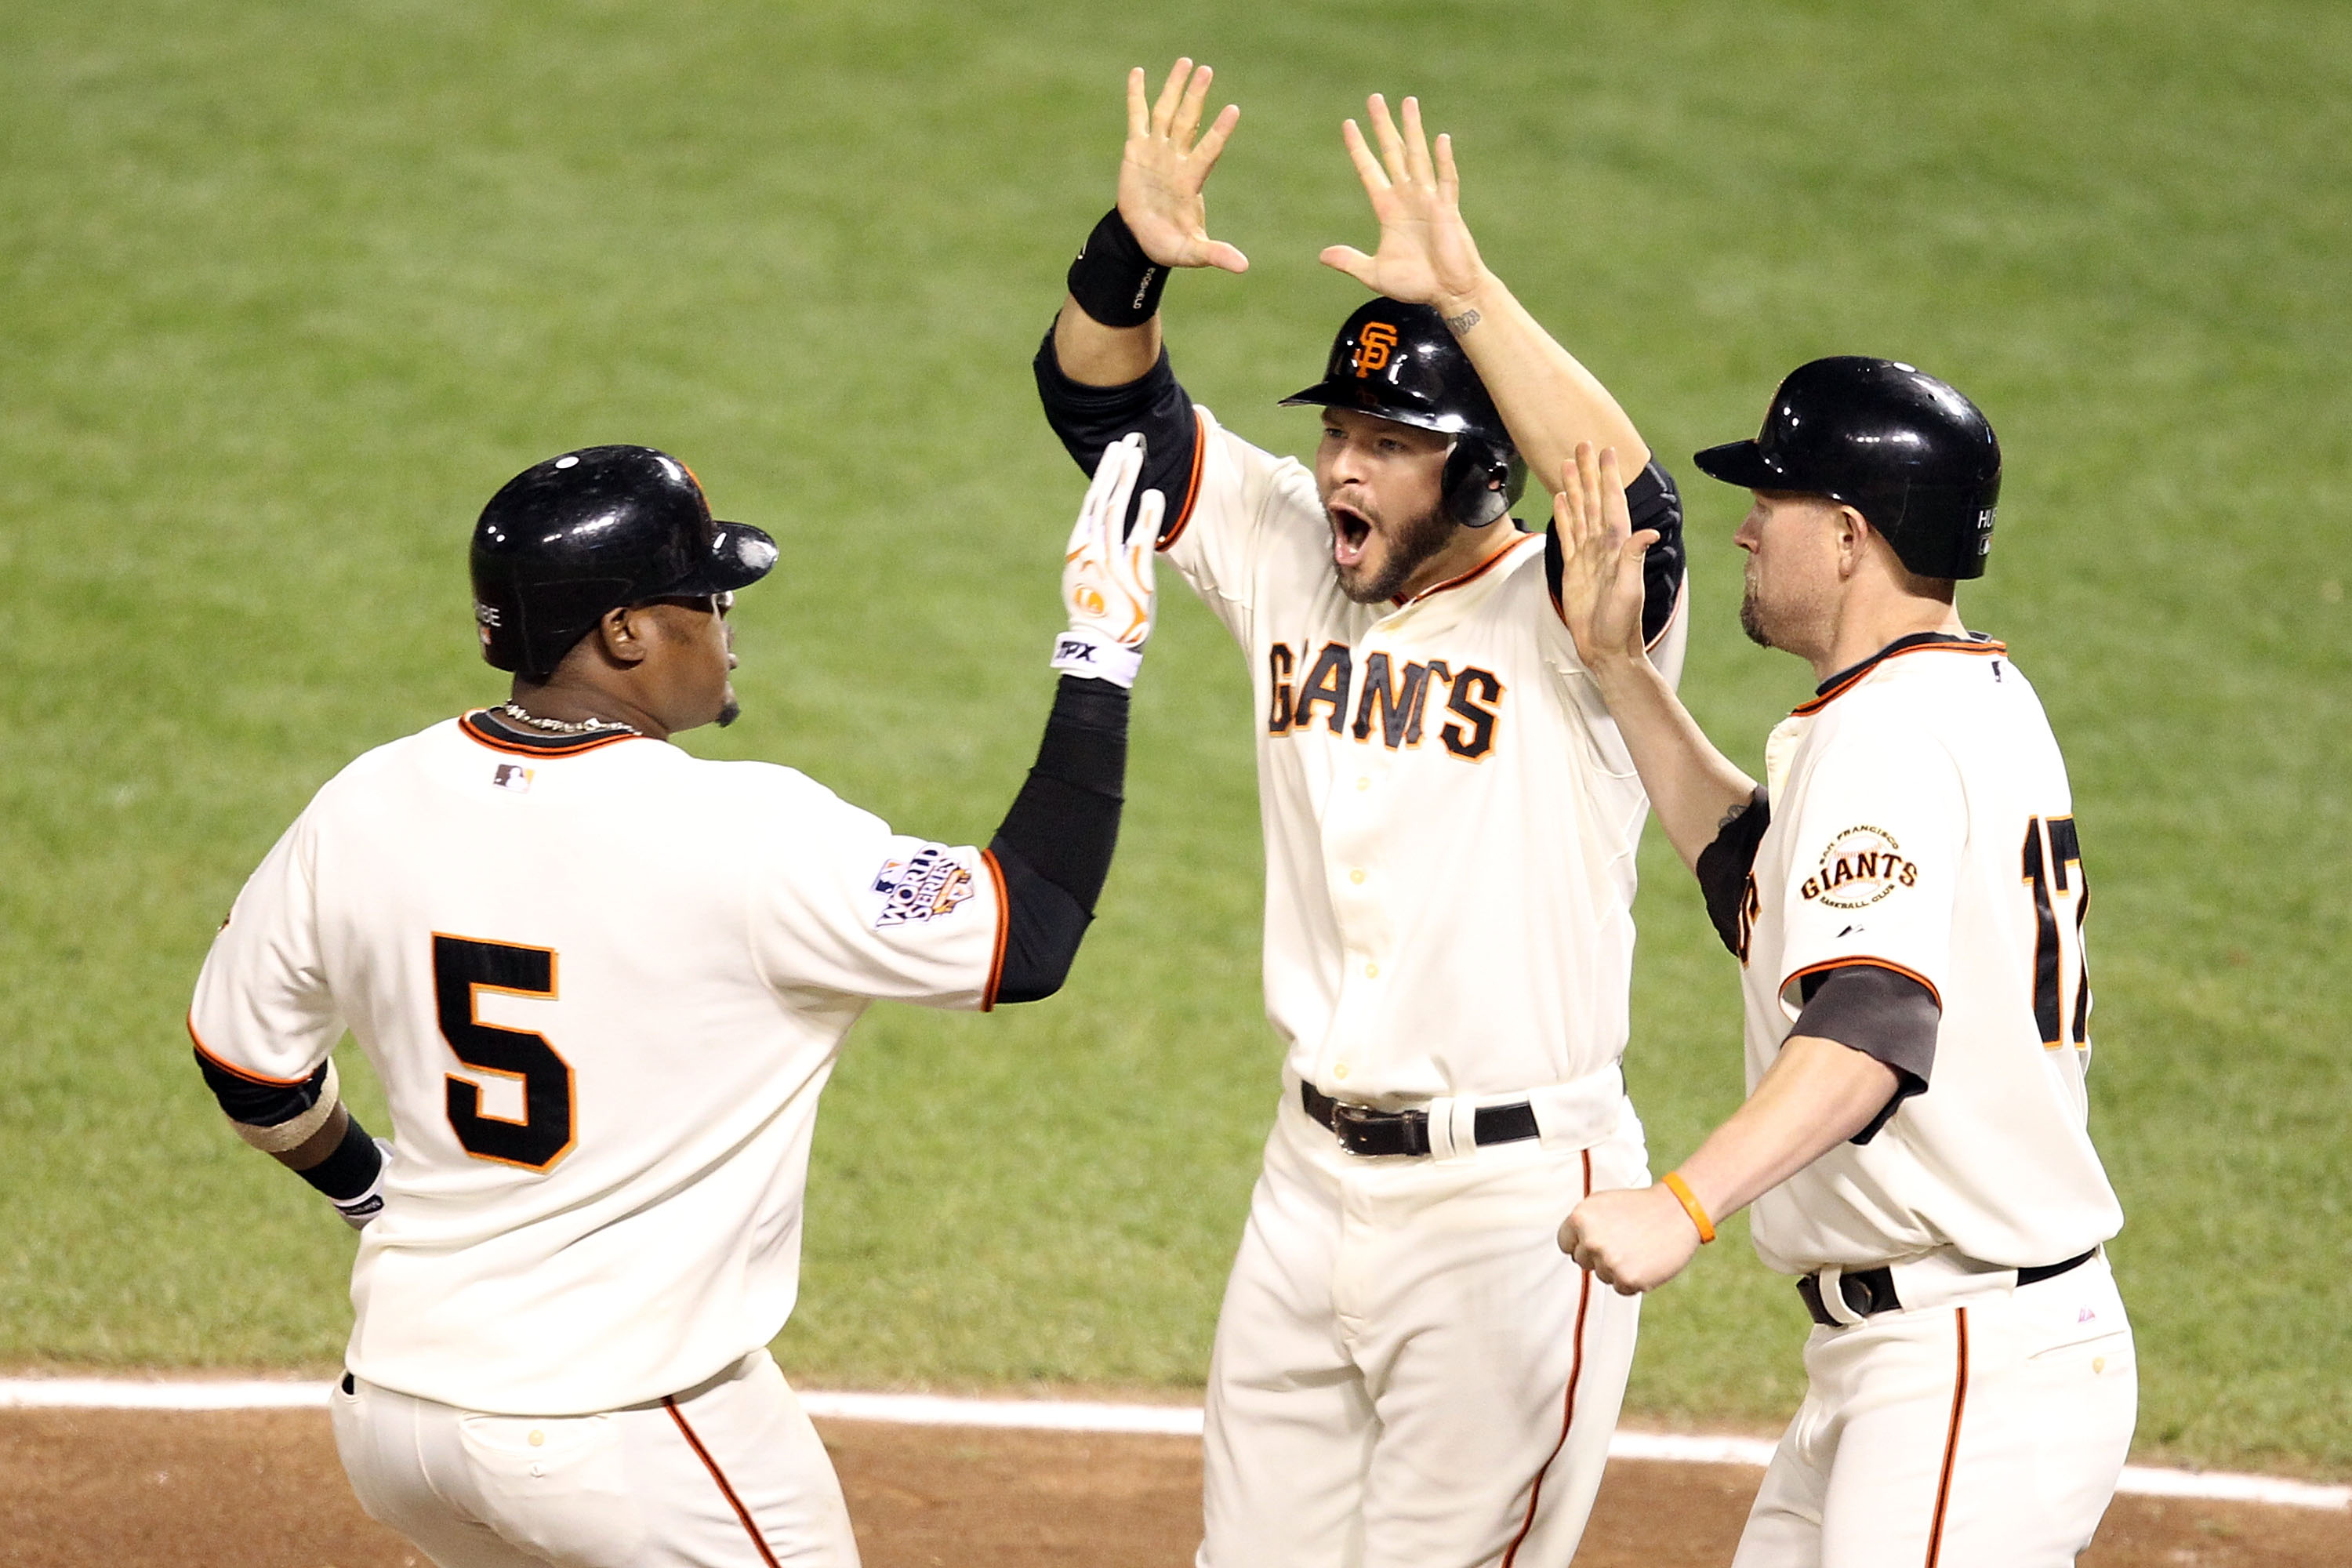 2010 World Series: The Giants Offense, Cliff Lee, and Other Game 1